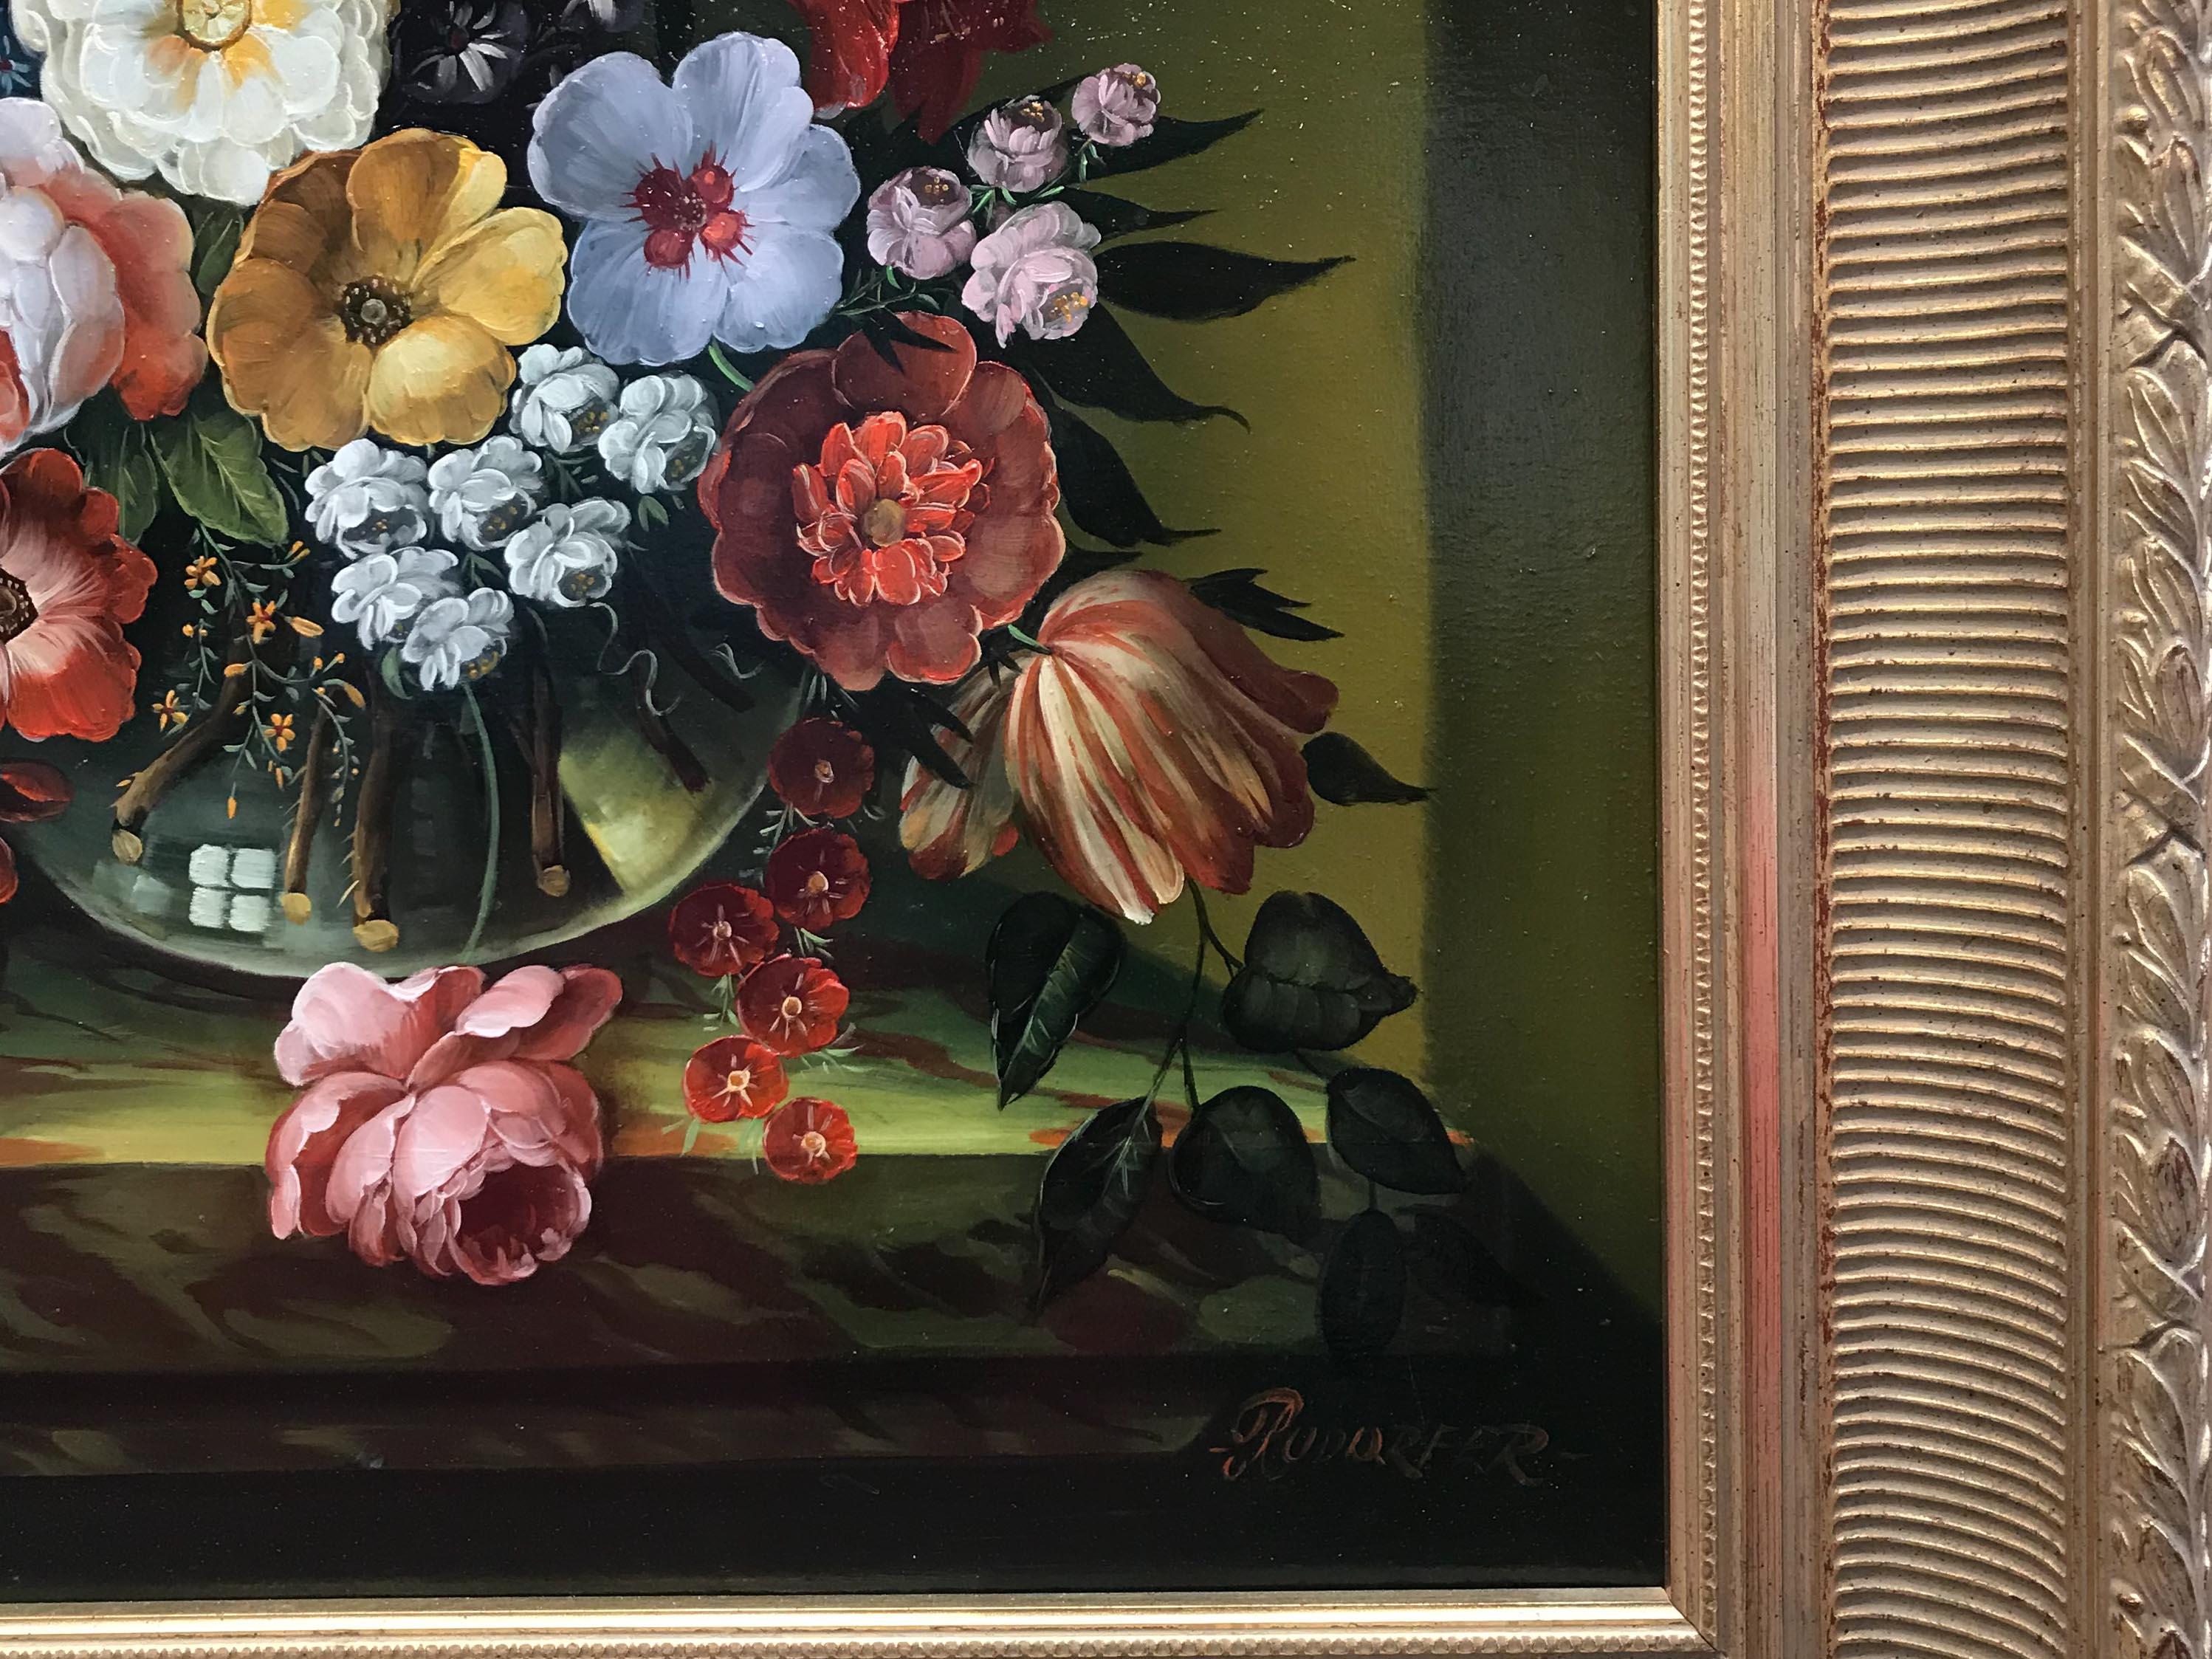 A very well painted contemporary oil painting on board in the style of the 17th/18th century Dutch Flemish school, in a gilded wood and gesso frame. The painting depicts a vase on top of a marble column full of various colourful flowers and leaves.